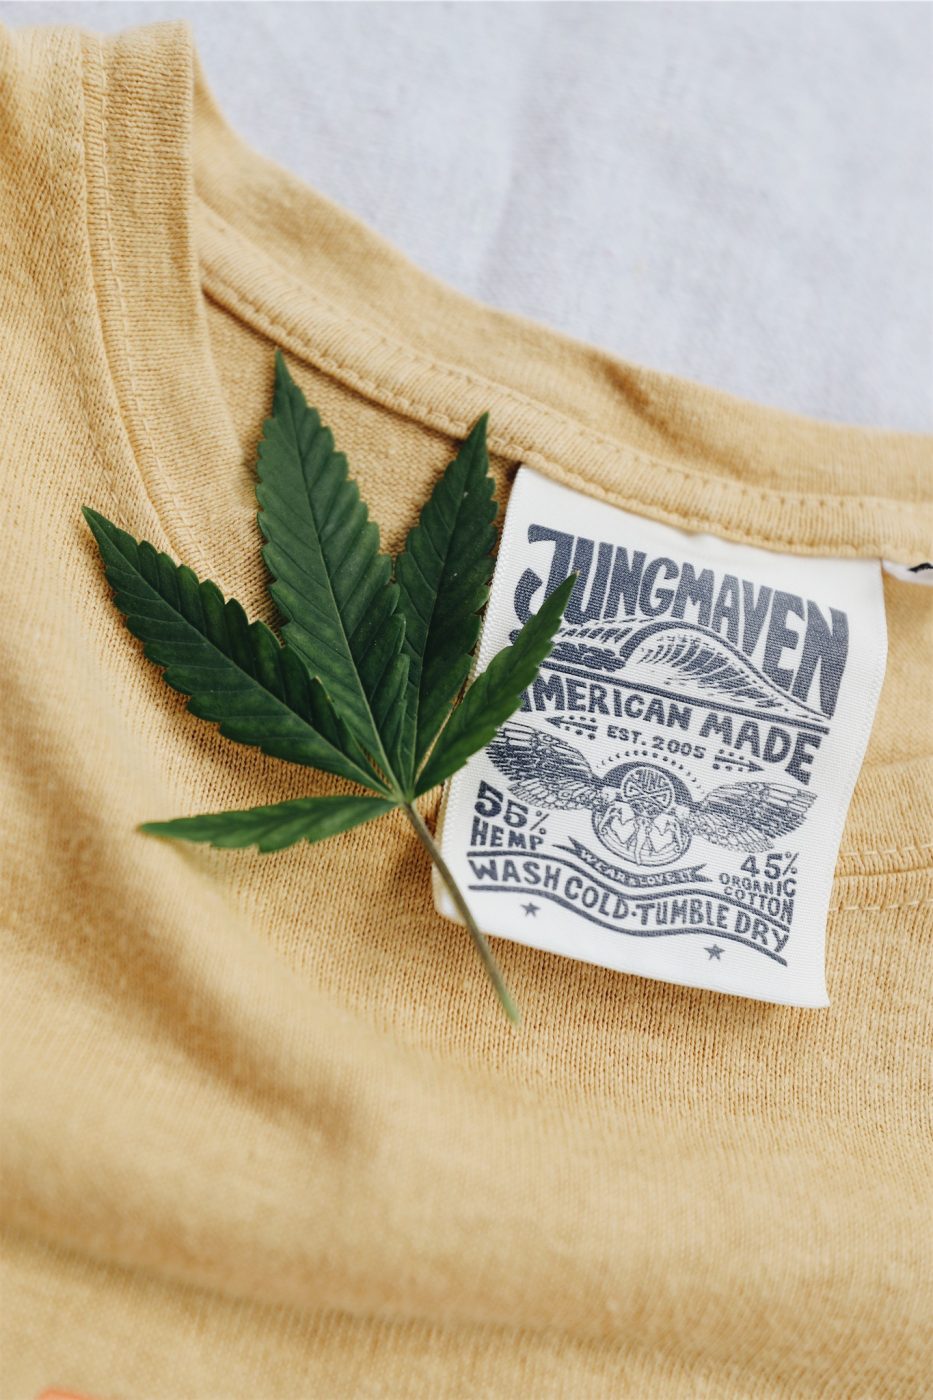 Designed tag on a tshirt made by Jungmaven next to a green hemp leaf.